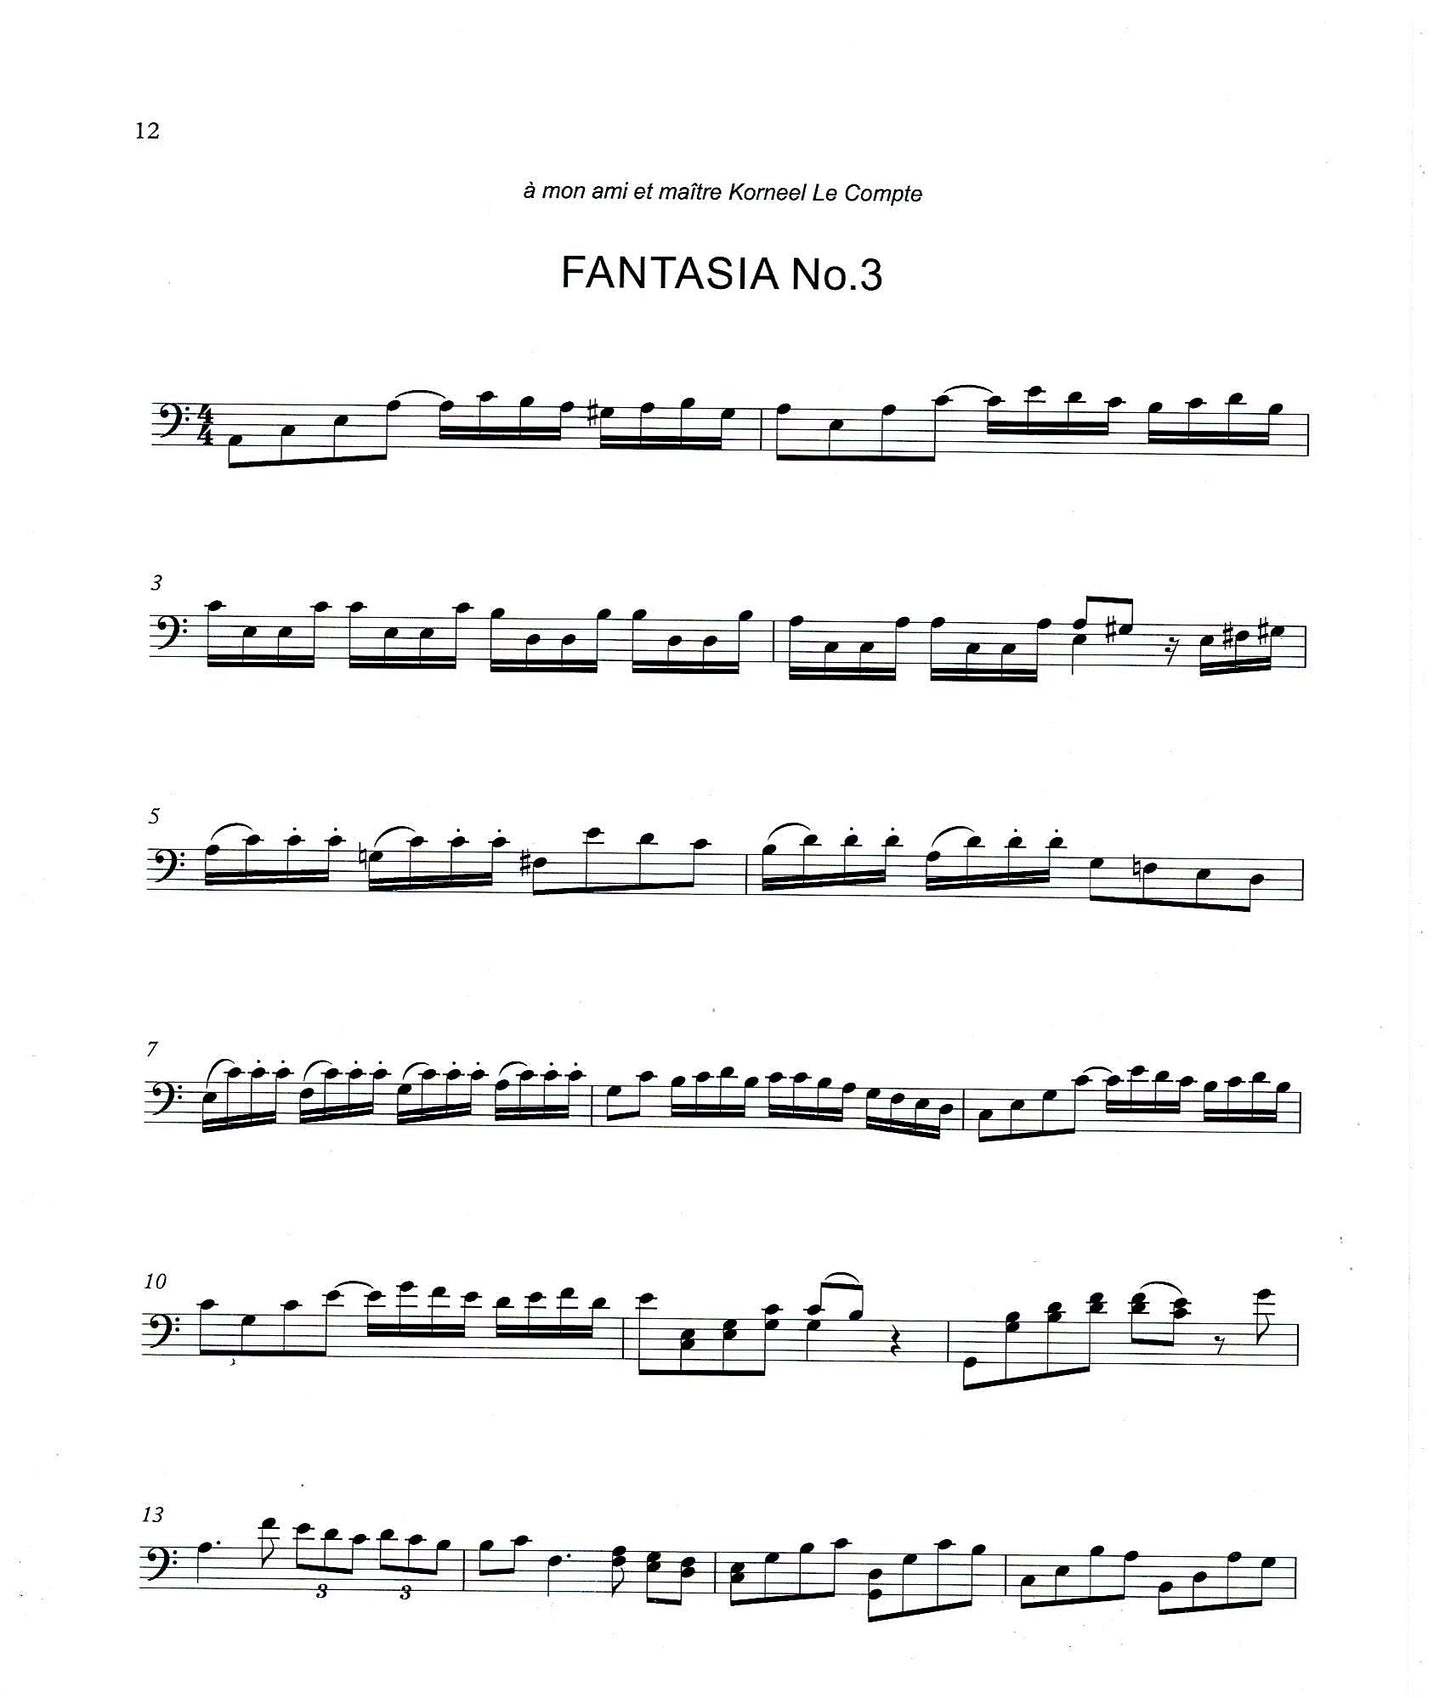 Michal Bylina: Four Fantasias for unaccompanied double bass